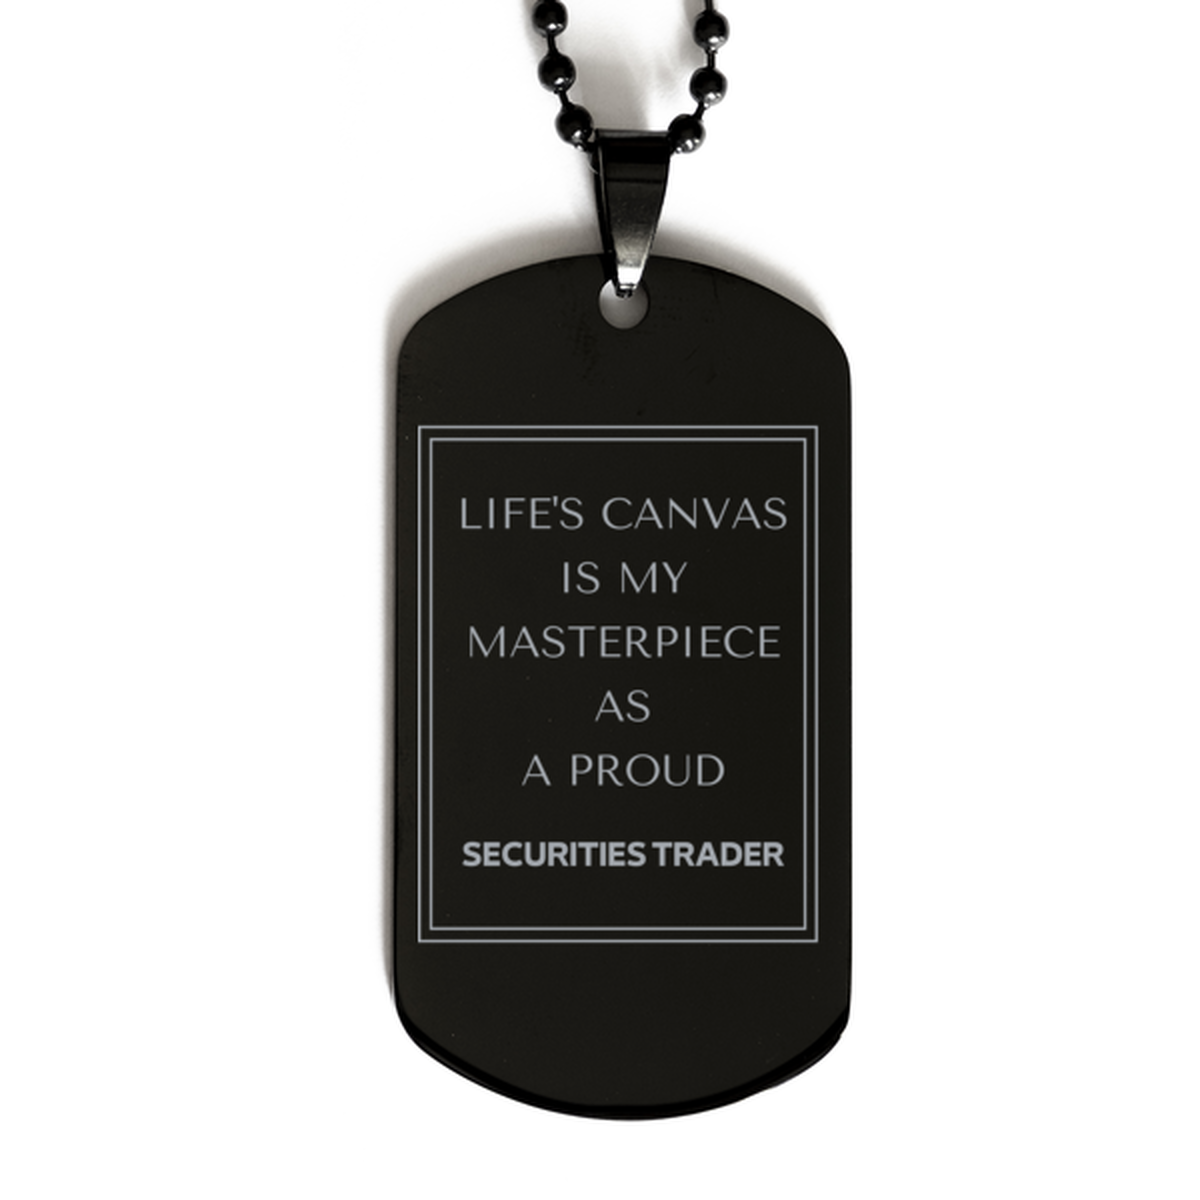 Proud Securities Trader Gifts, Life's canvas is my masterpiece, Epic Birthday Christmas Unique Black Dog Tag For Securities Trader, Coworkers, Men, Women, Friends